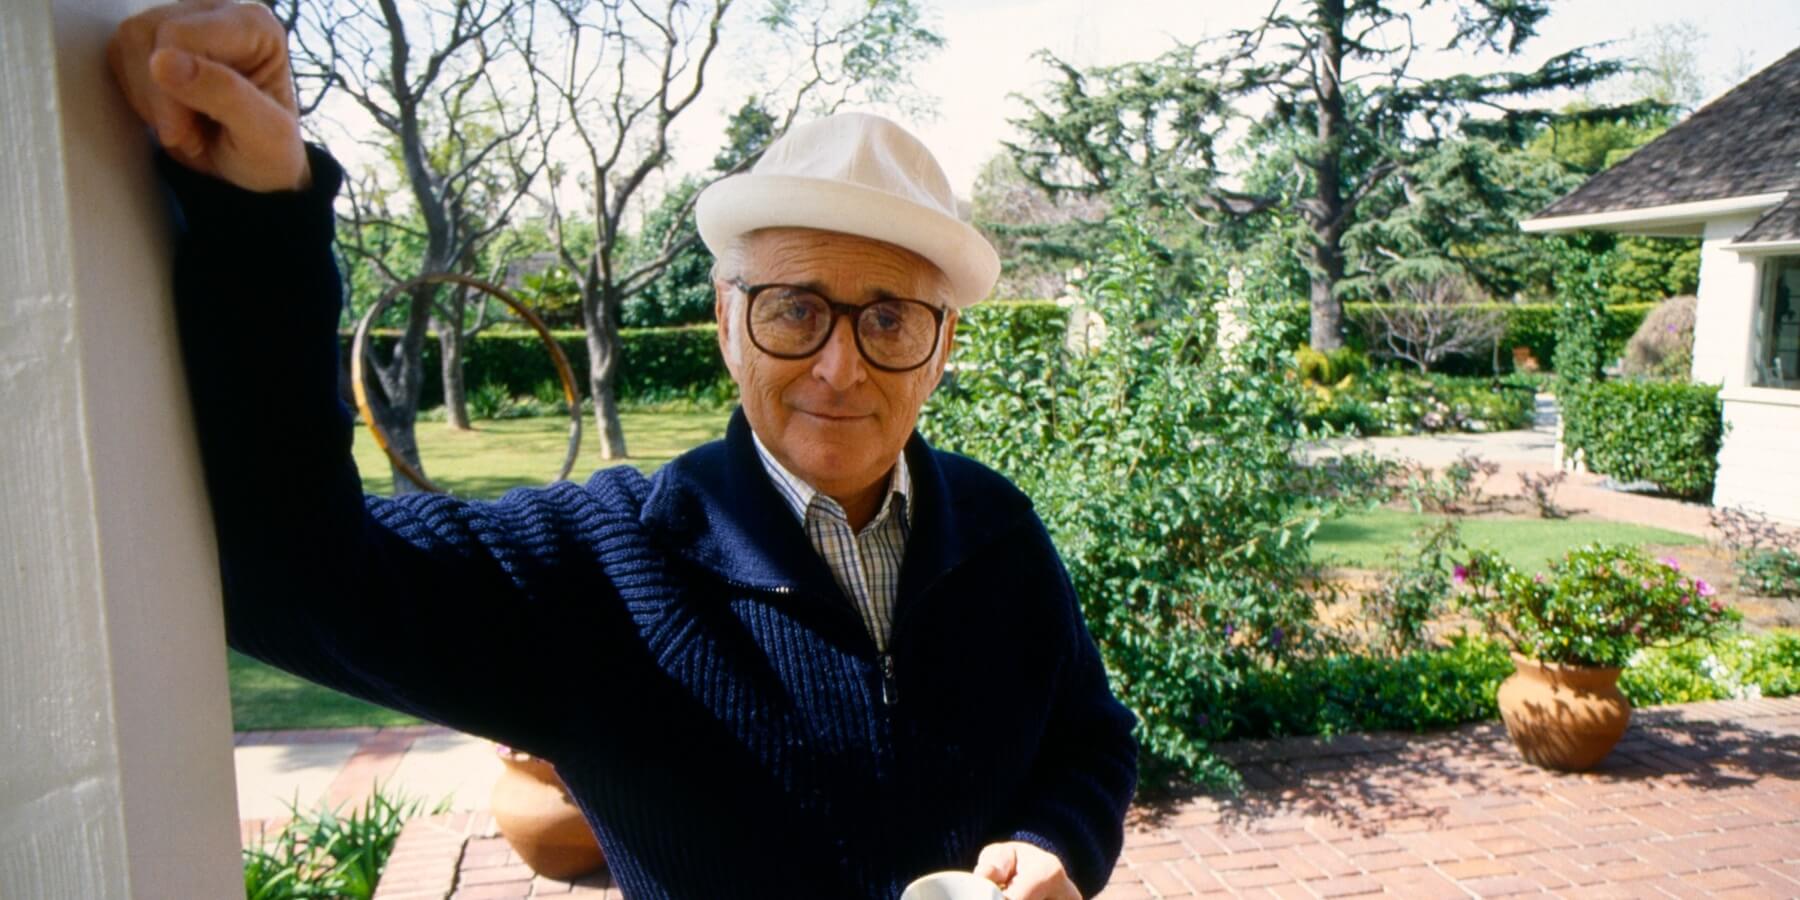 Norman Lear, who died at age 101, was one of the most prolific creators in television history.